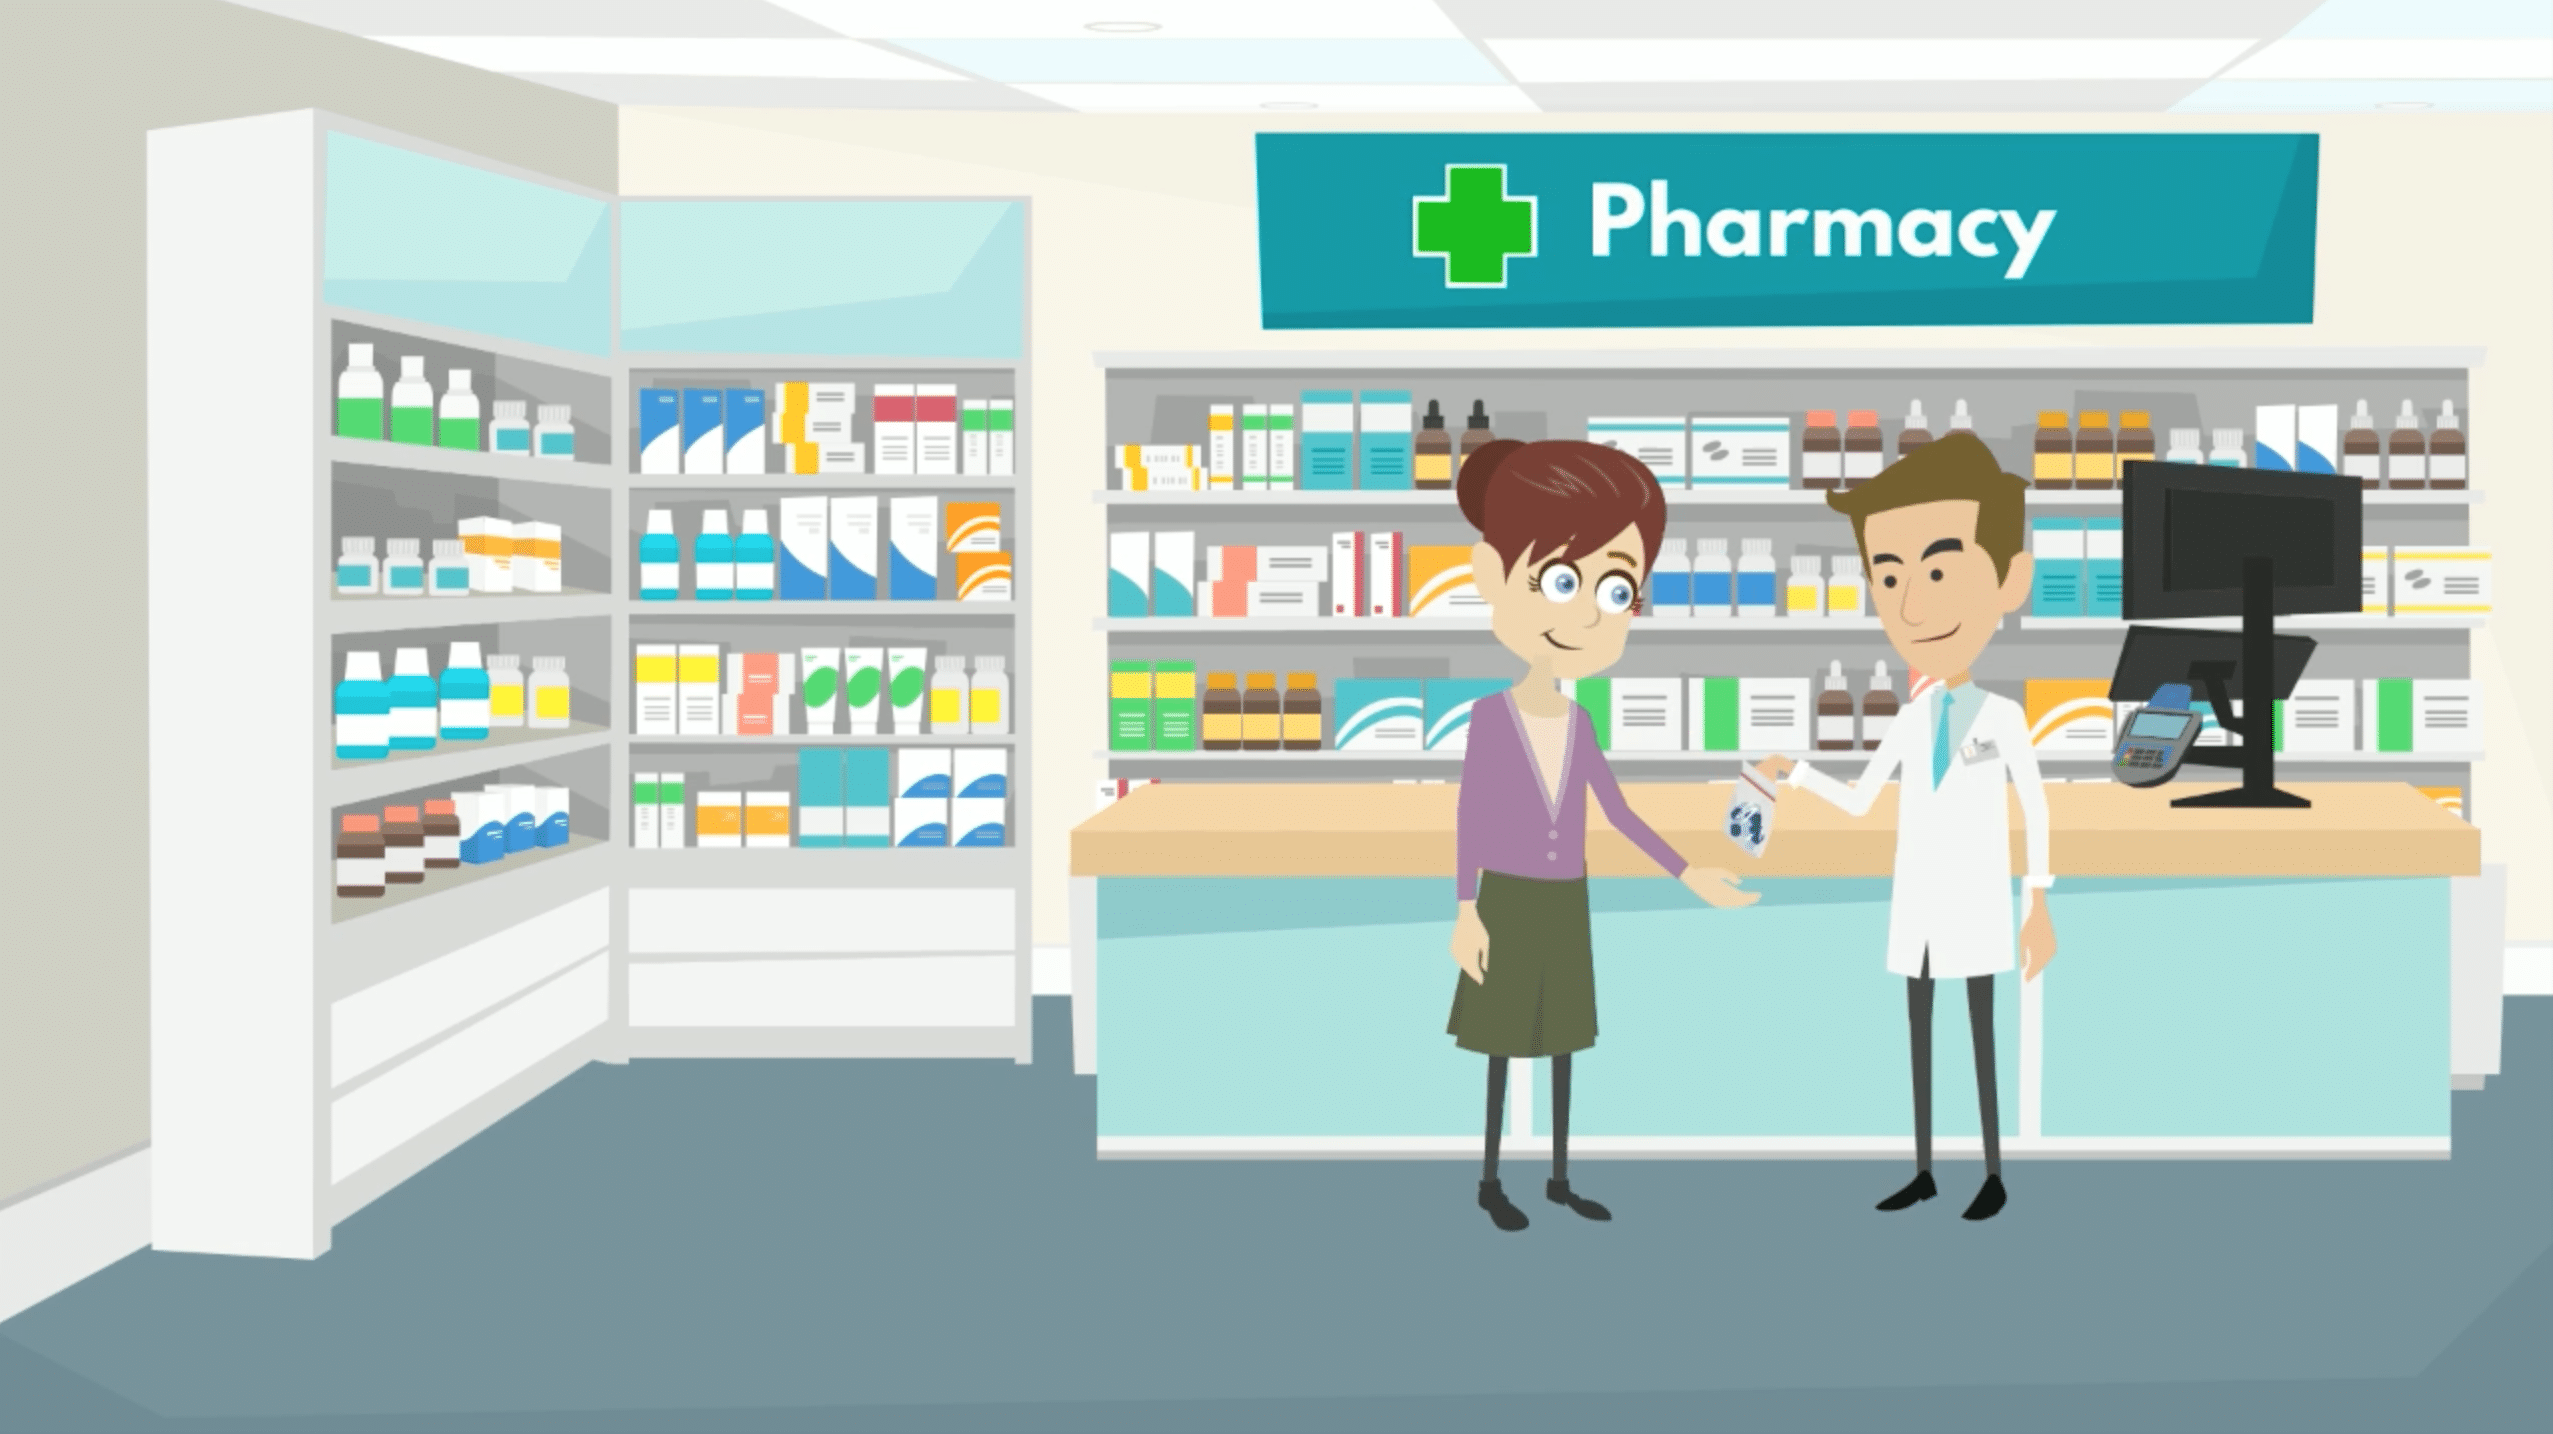 Help is at hand this winter with The Sound Doctor – Scottish Pharmacist